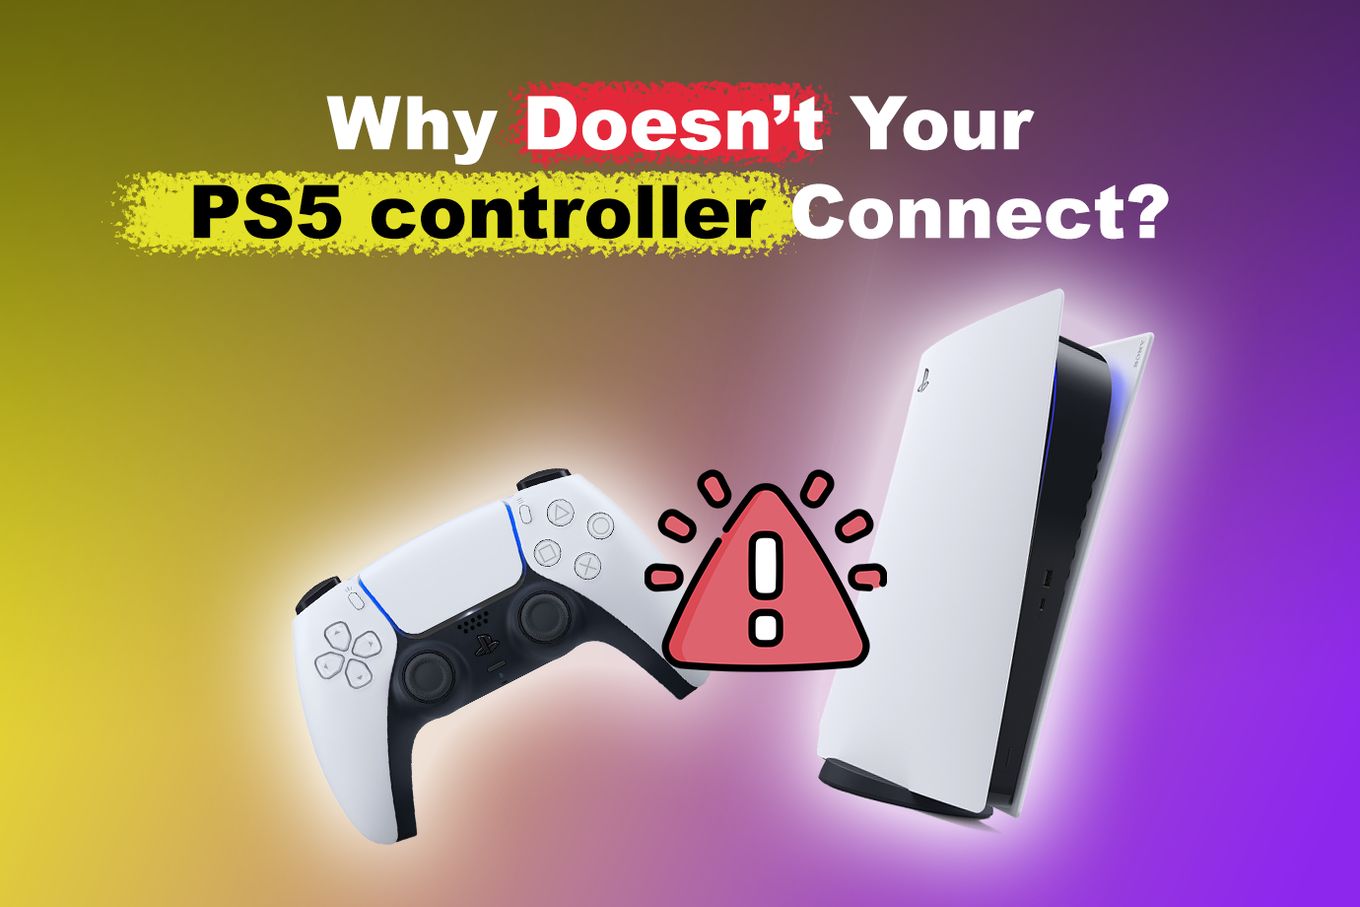 How to connect a PS5 controller on PC